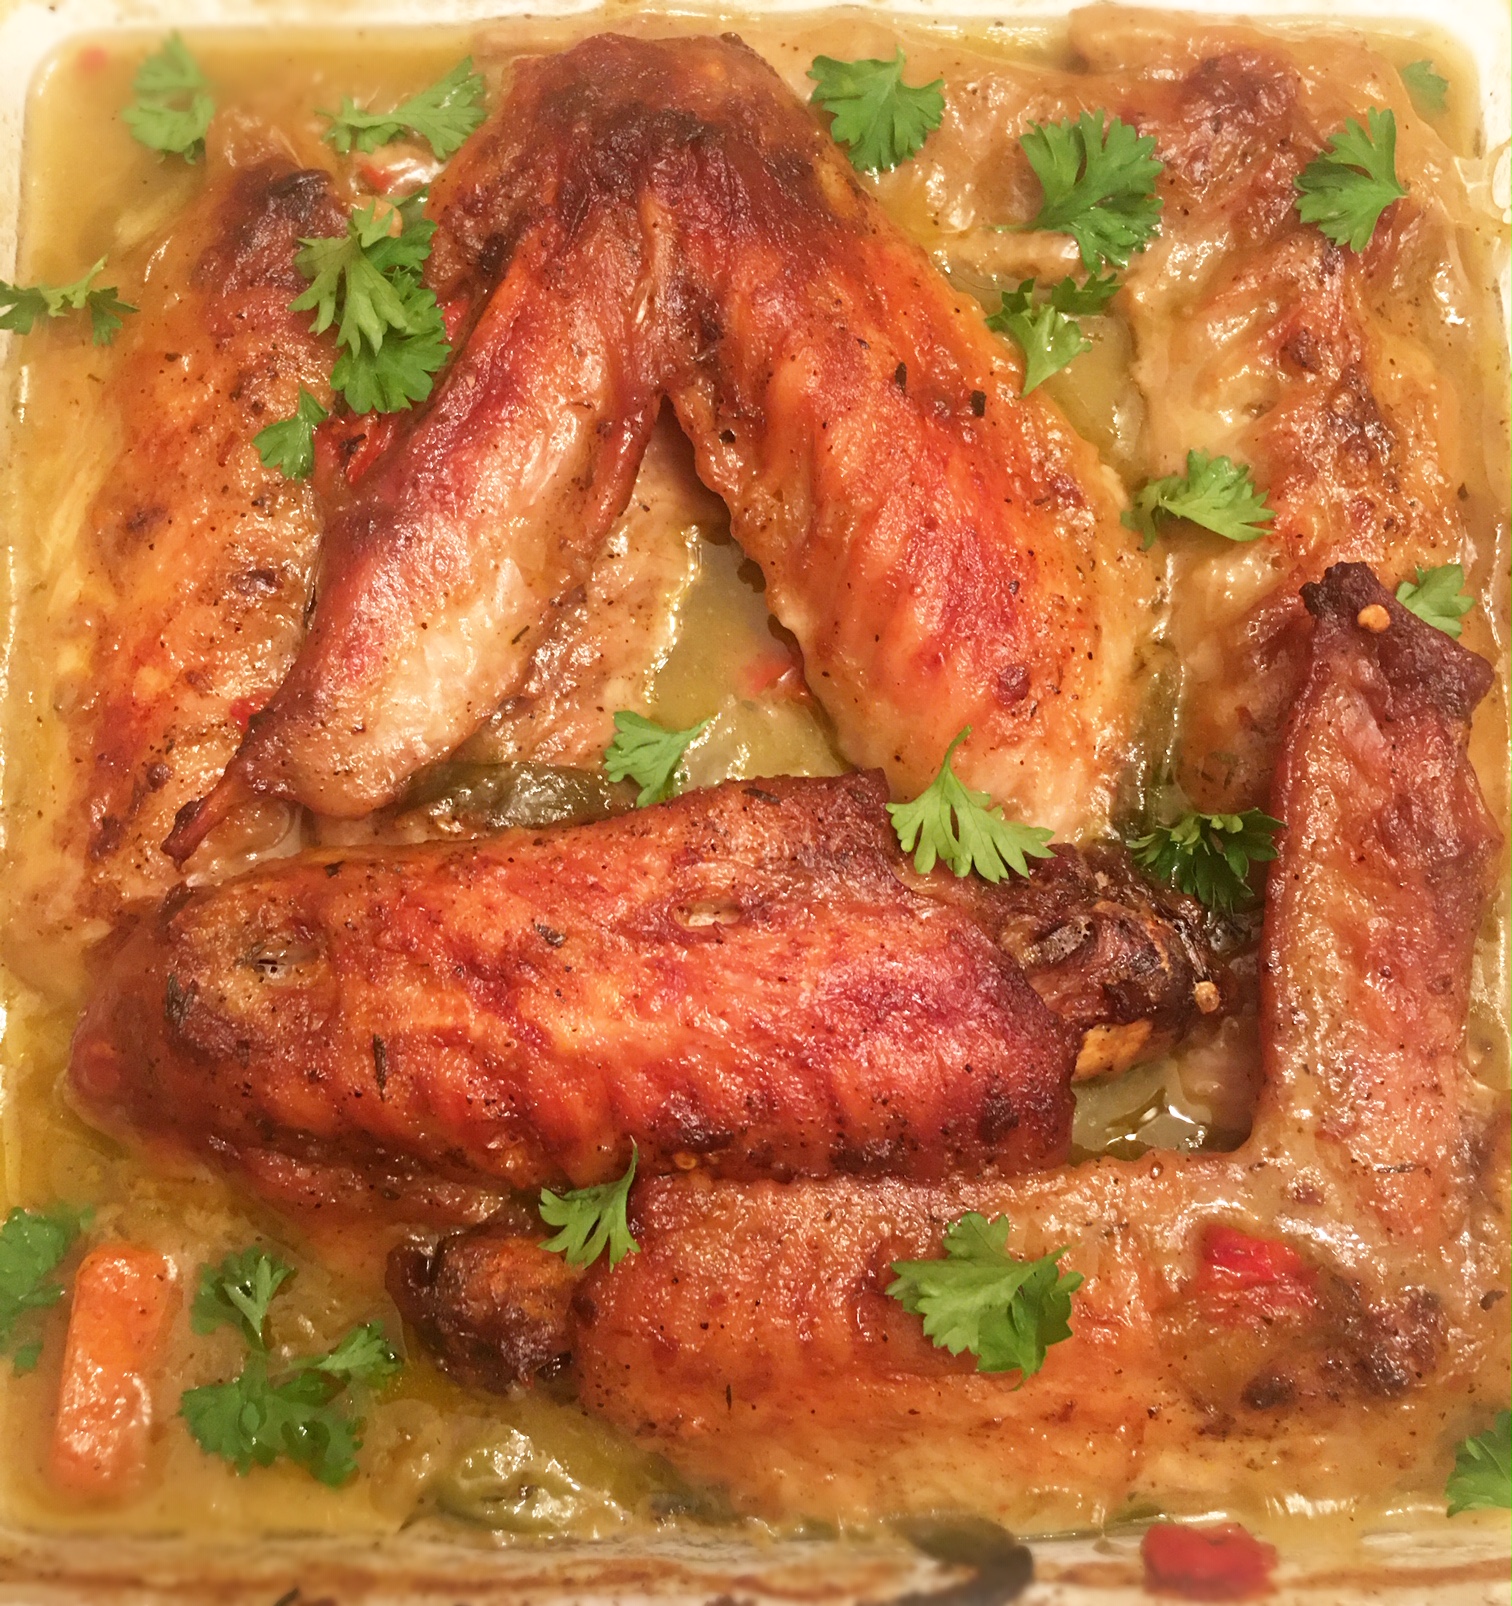 Baked Turkey Wings with Veggies and Herbs Gravy